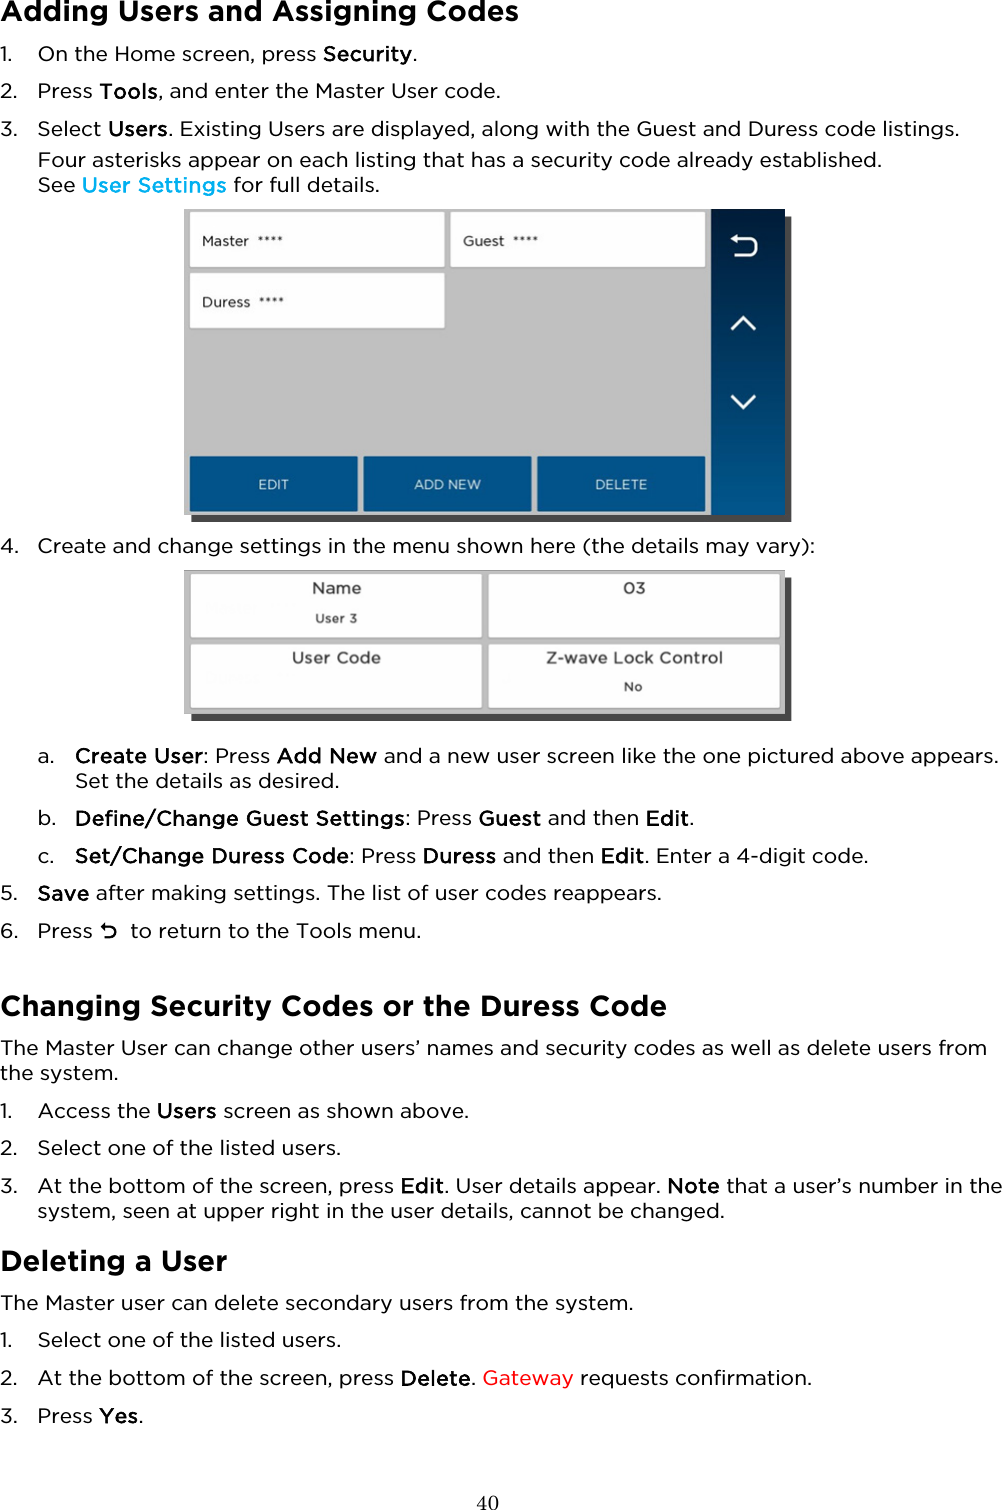  40  Adding Users and Assigning Codes 1. On the Home screen, press Security.  2. Press Tools, and enter the Master User code.  3. Select Users. Existing Users are displayed, along with the Guest and Duress code listings. Four asterisks appear on each listing that has a security code already established.  See User Settings for full details.    4. Create and change settings in the menu shown here (the details may vary):    a. Create User: Press Add New and a new user screen like the one pictured above appears. Set the details as desired. b. Define/Change Guest Settings: Press Guest and then Edit. c. Set/Change Duress Code: Press Duress and then Edit. Enter a 4-digit code. 5. Save after making settings. The list of user codes reappears.   6. Press   to return to the Tools menu.  Changing Security Codes or the Duress Code The Master User can change other users’ names and security codes as well as delete users from the system. 1. Access the Users screen as shown above. 2. Select one of the listed users.   3. At the bottom of the screen, press Edit. User details appear. Note that a user’s number in the system, seen at upper right in the user details, cannot be changed.    Deleting a User The Master user can delete secondary users from the system.  1. Select one of the listed users.   2. At the bottom of the screen, press Delete. Gateway requests confirmation.  3. Press Yes. 